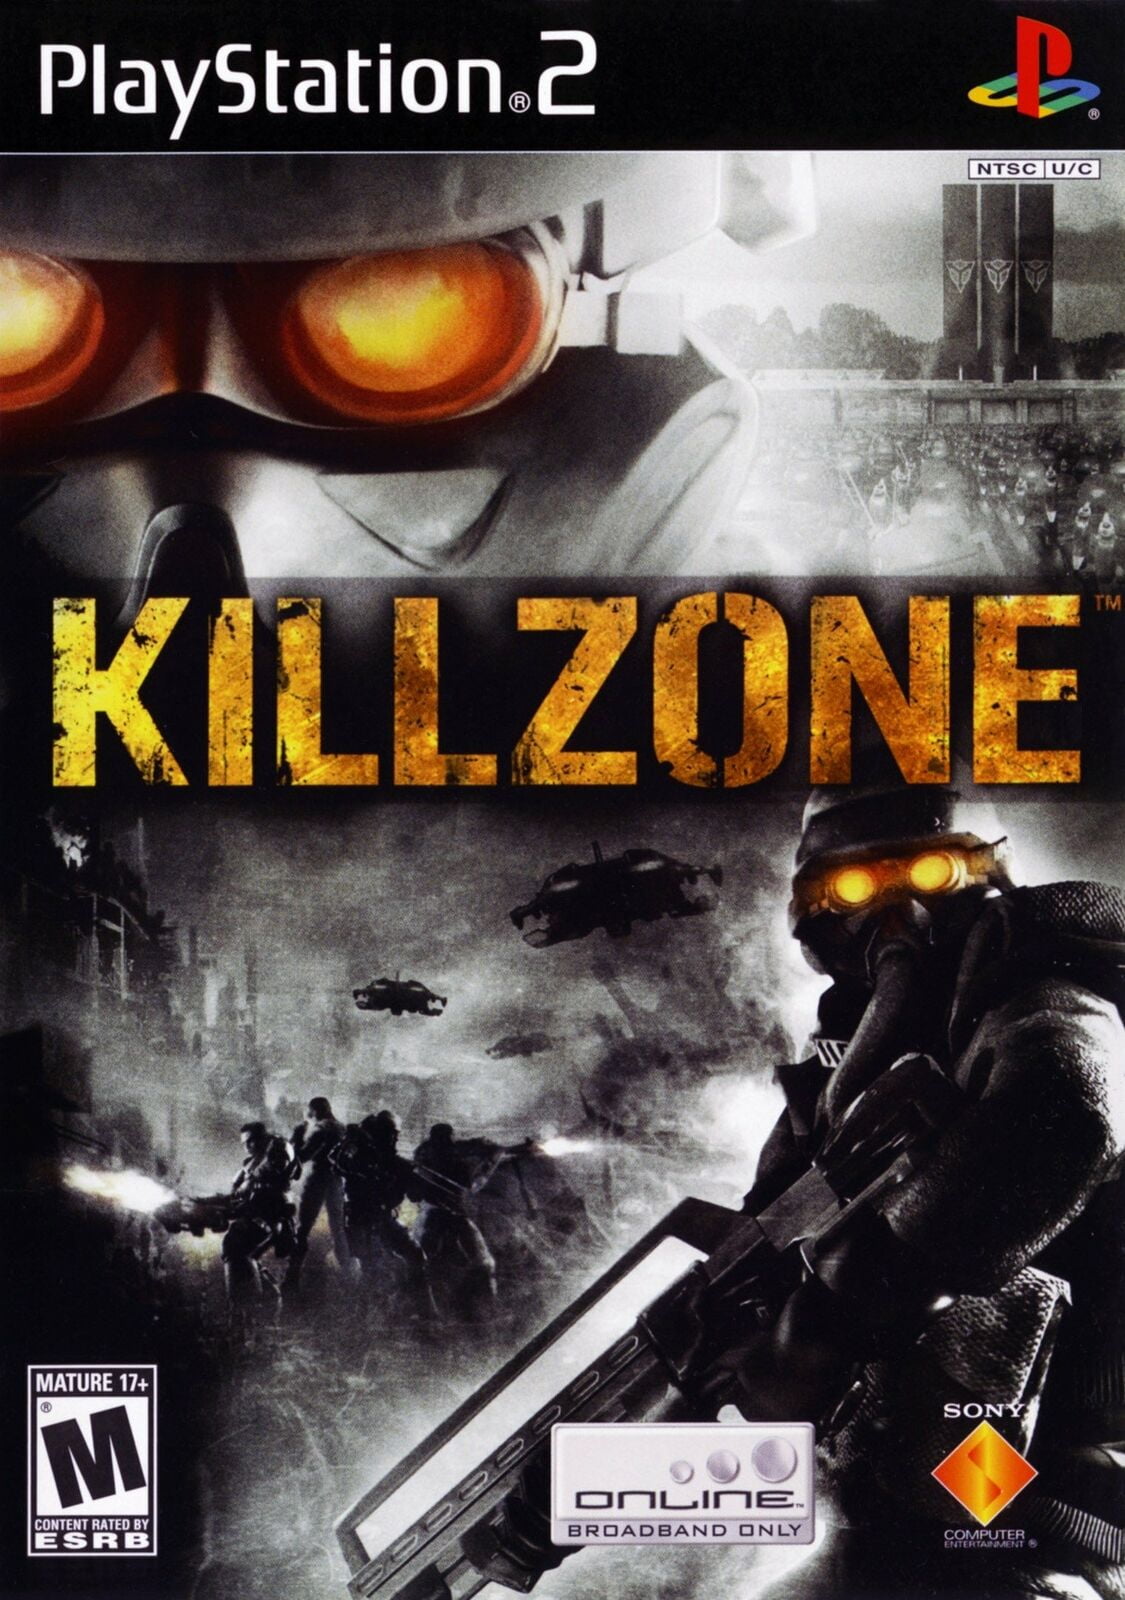 Mavin  Killzone. PS2 Game. PlayStation 2. Greatest Hits. Video Game.  Tested Working